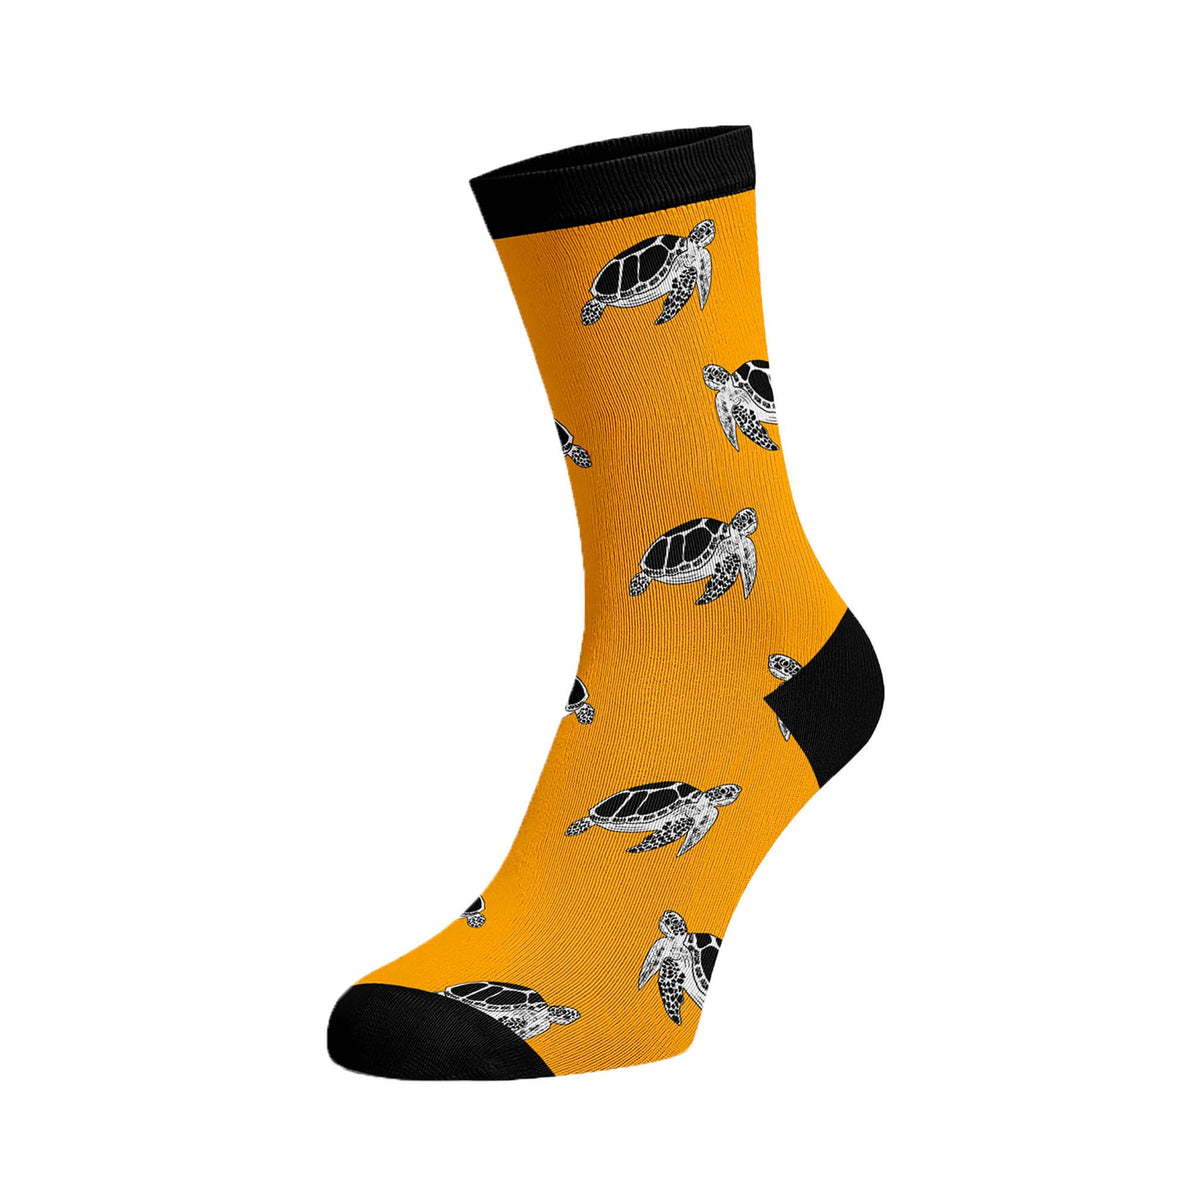 Hansie en Grietjie vulnerable socks featuring a loggerhead turtle design, supporting conservation efforts in Africa.